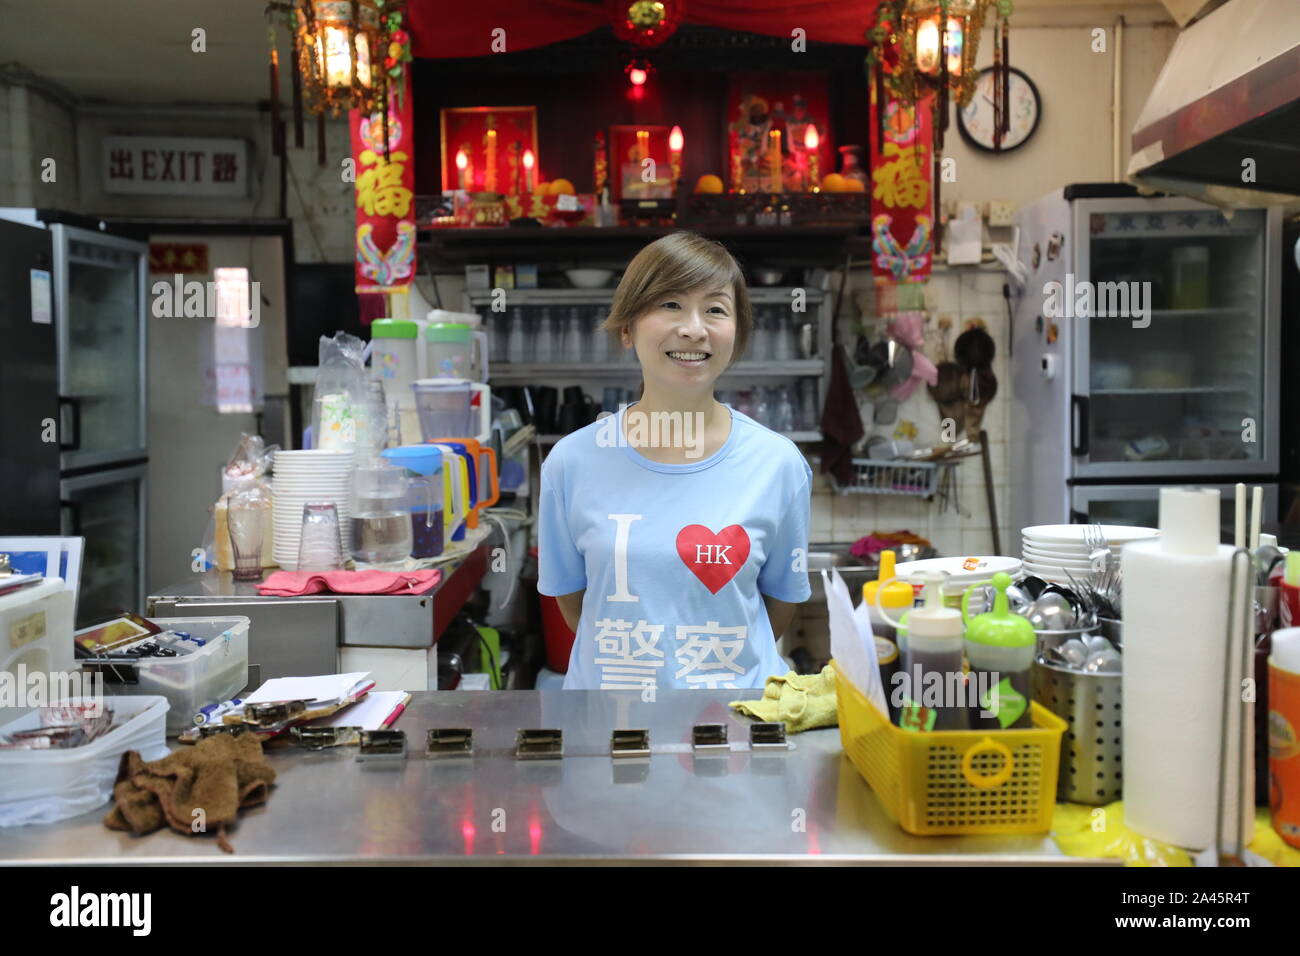 (191012) -- HONG KONG, Oct. 12, 2019 (Xinhua) -- Kate Lee, wearing a T-shirt with the 'I love HK police' slogan on it, waits for customers at her tea restaurant in Kowloon, south China's Hong Kong, Oct. 10, 2019. Nestling in the labyrinthine seafood market of the quiet Lei Yue Mun fishing village in Hong Kong, a snug little tea restaurant has unexpectedly become a beacon of courage for ordinary Hong Kong people seeking peace amid the recent chaos. After she posted pictures backing up Hong Kong police against some radical protesters at the end of June, Kate Lee, the owner of the tea restau Stock Photo